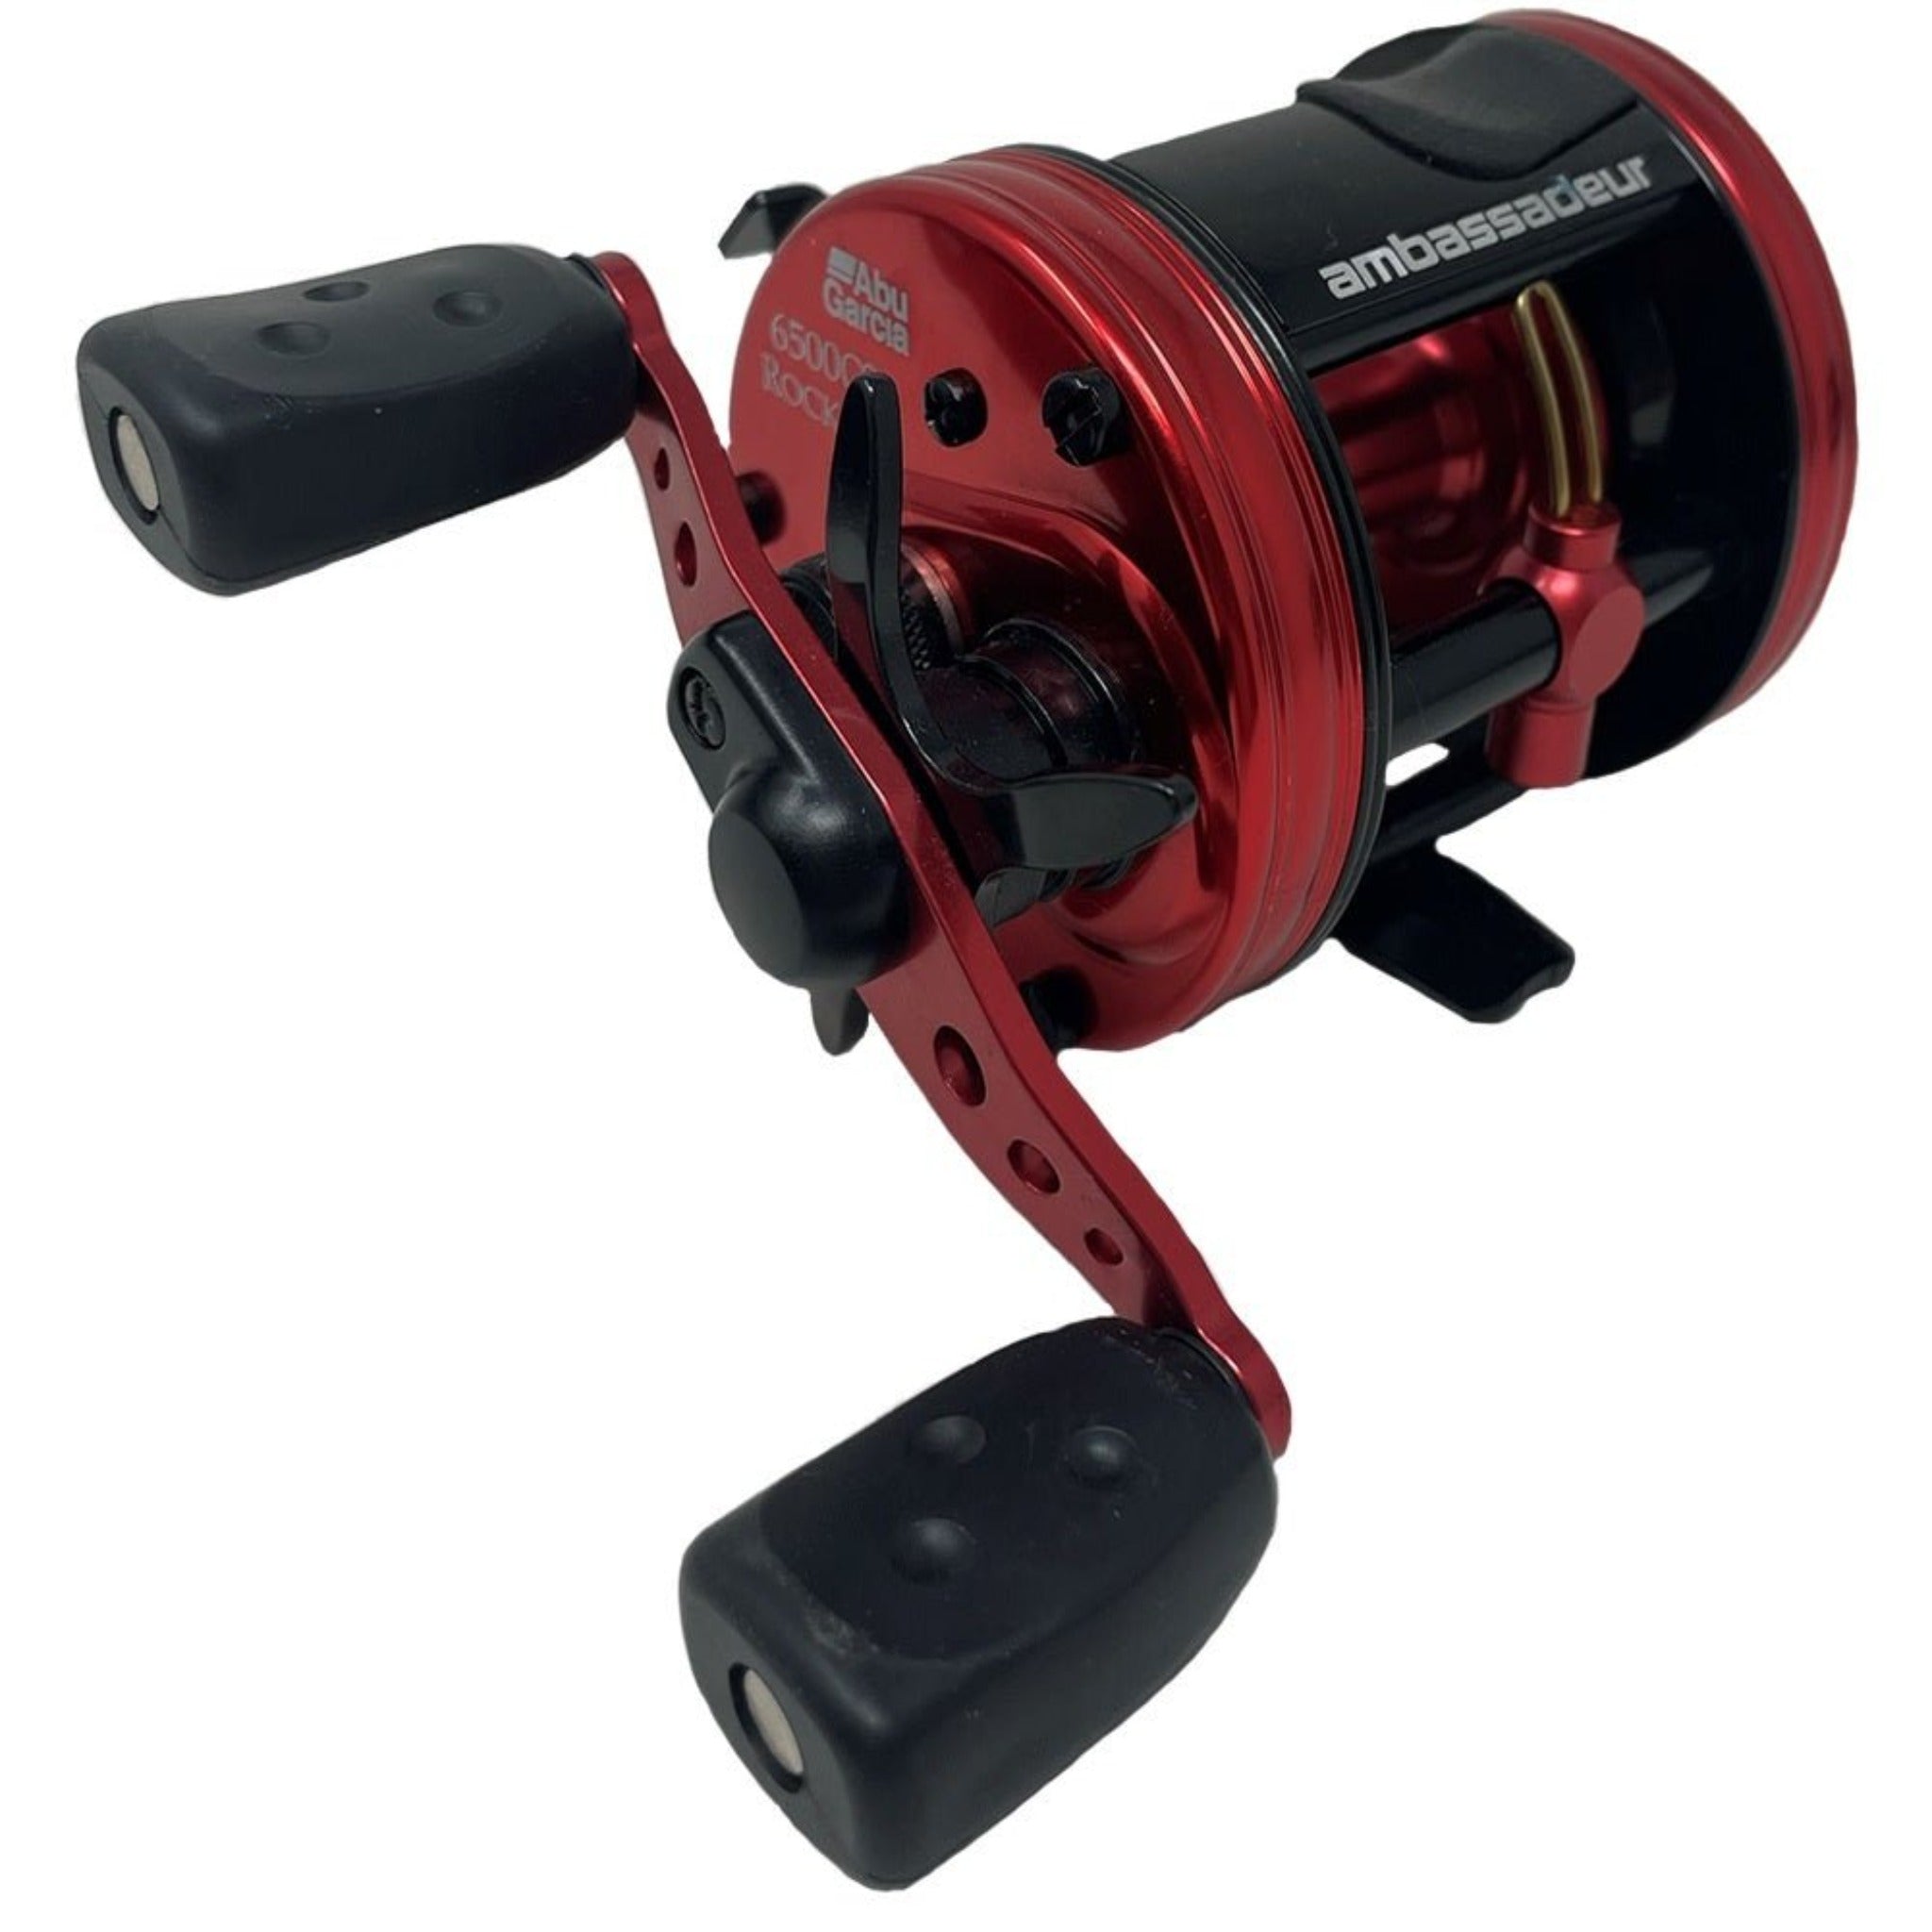 NEW Abu Garcia Bait Finesse Reel and Rods ICAST 2023 